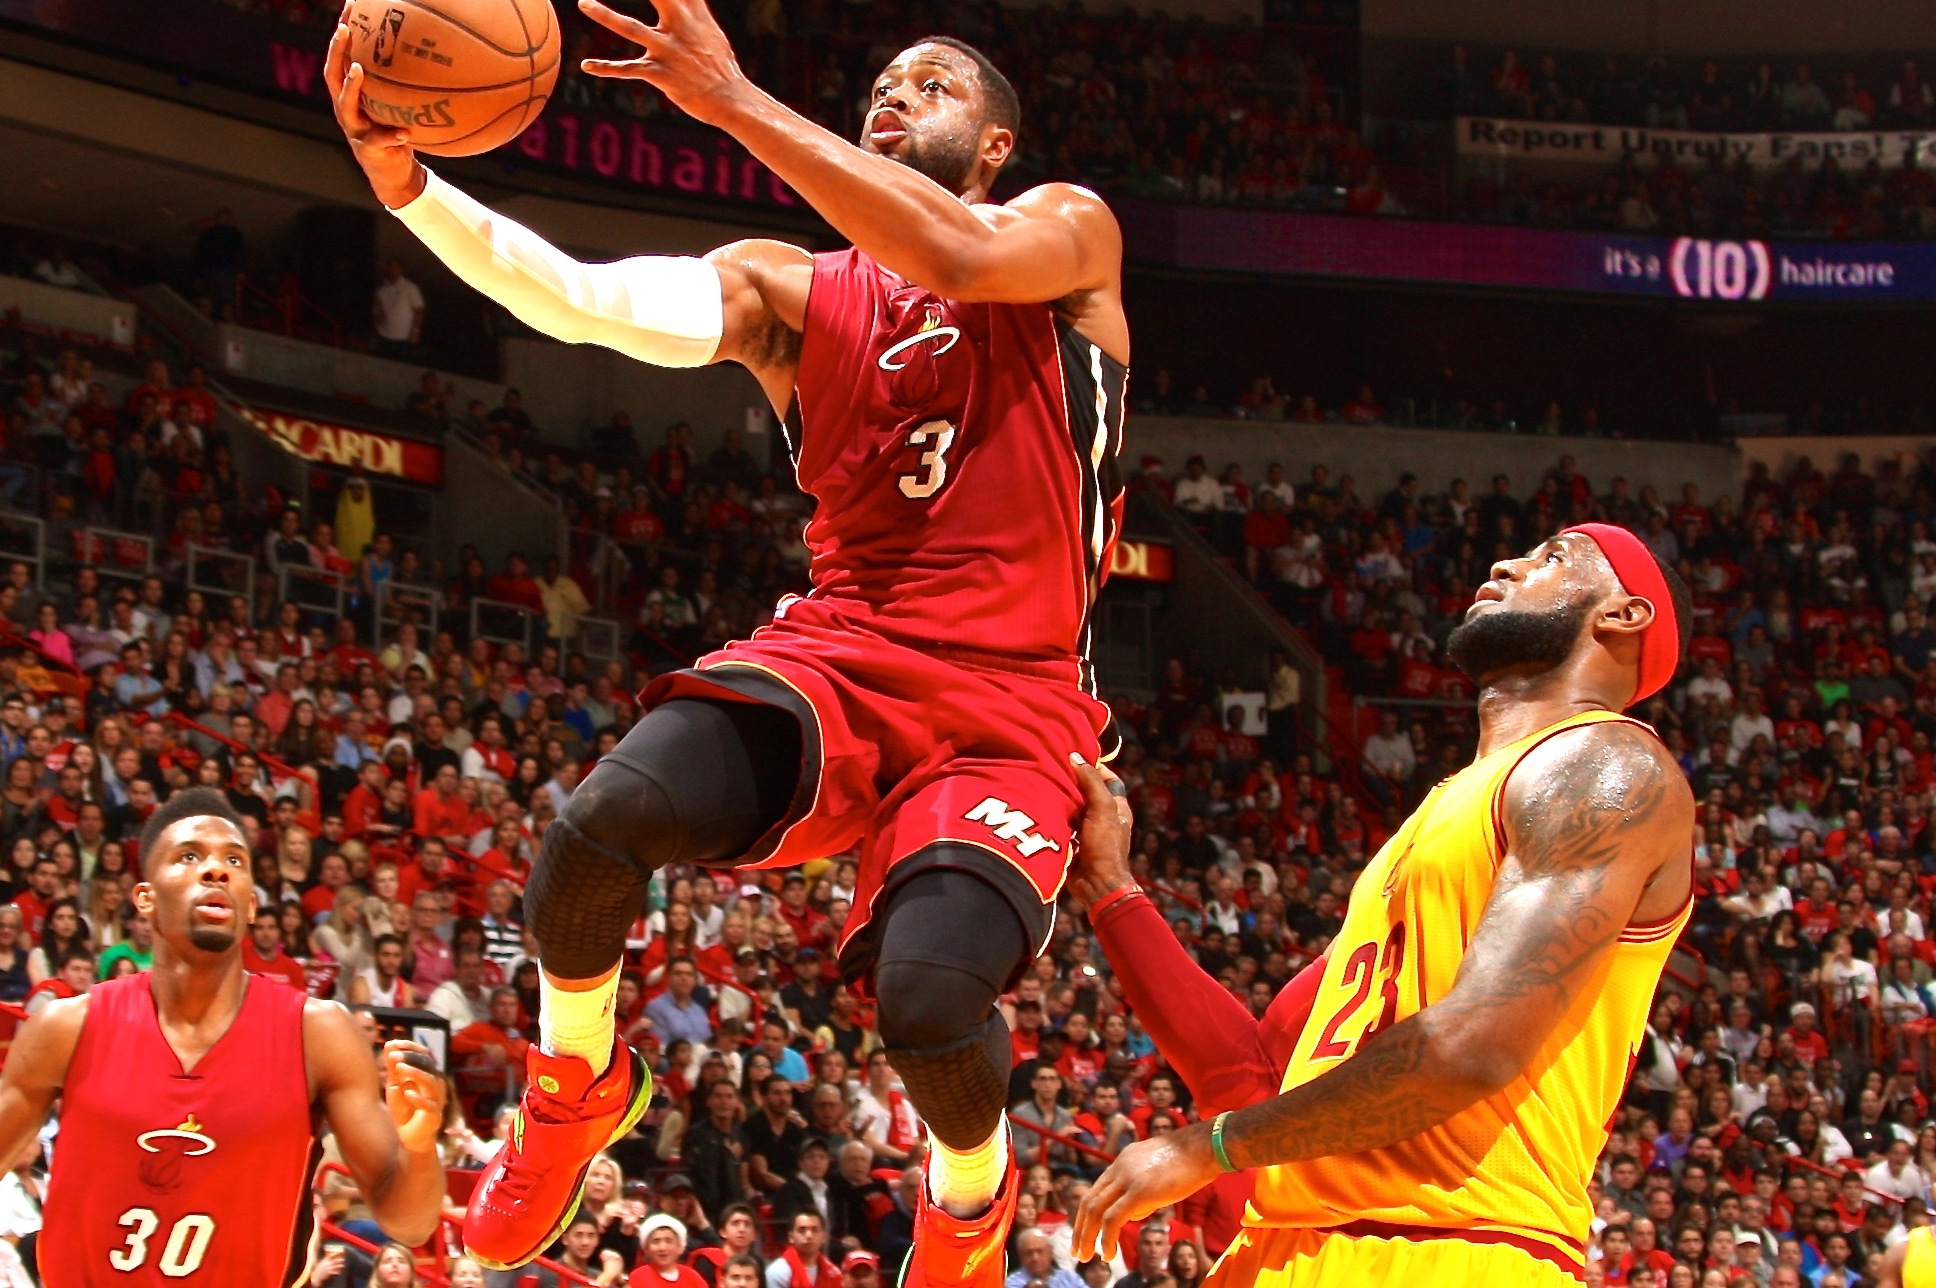 Cleveland Cavaliers vs. Miami Heat Live Score, Highlights and Analysis